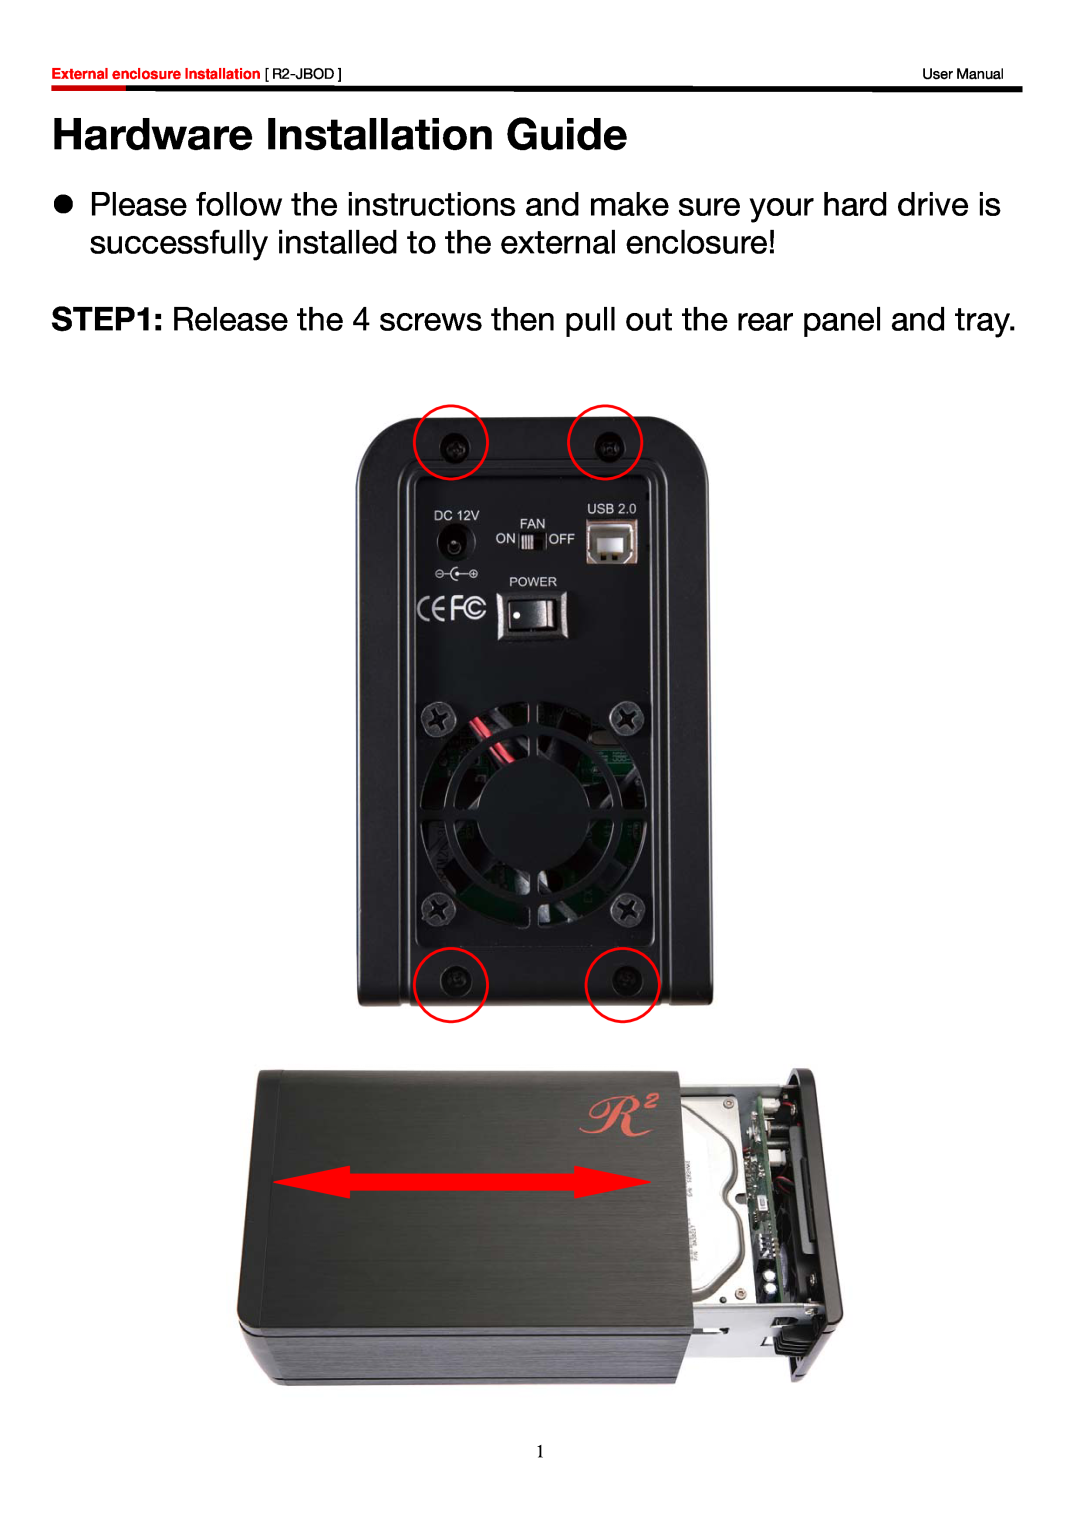 Rosewill R2-JBOD Hardware Installation Guide, Release the 4 screws then pull out the rear panel and tray, User Manual 